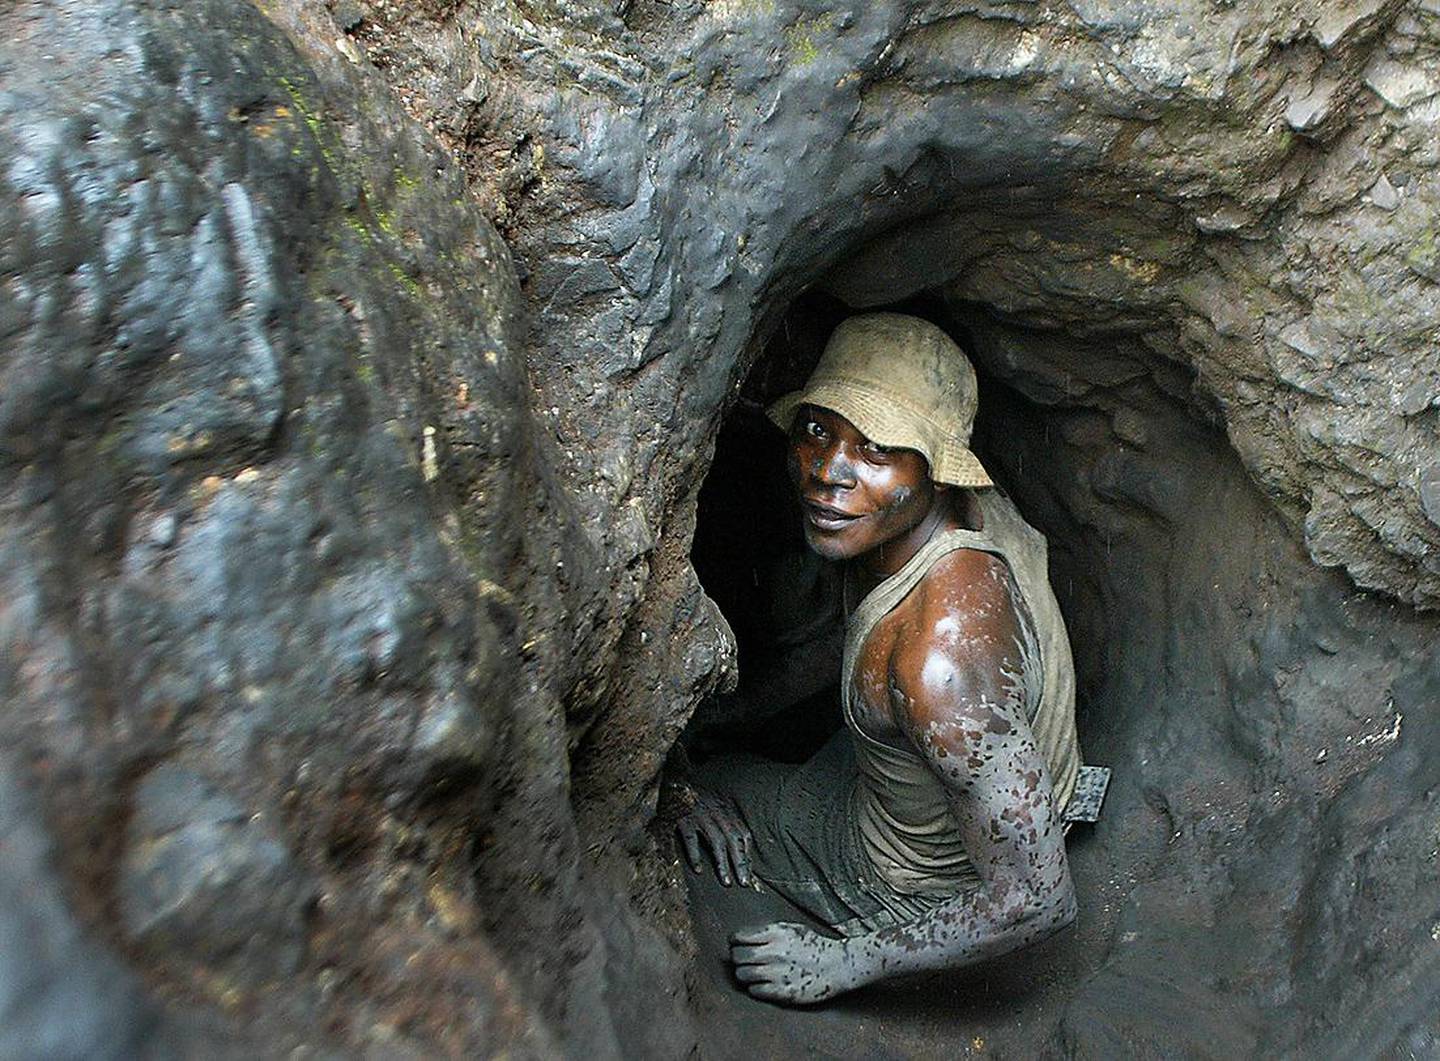 FILE - In this April 10, 2004 file photo, a man enters a tunnel dug with shovels in the Shinkolobwe cobalt mine, 35km (22 miles) from the town of Likasi in the Democratic Republic of Congo. U.N. Security Council Resolution 1540 of 2004 obligates governments to give a full accounting of their nuclear materials, but as U.S. President Barack Obama hosts a summit on nuclear security April 12-13 in Washington, many states have fallen short of the reporting deadline, including Congo, the source of the uranium for the first atomic bomb. (AP Photo/Schalk van Zuydam, File)